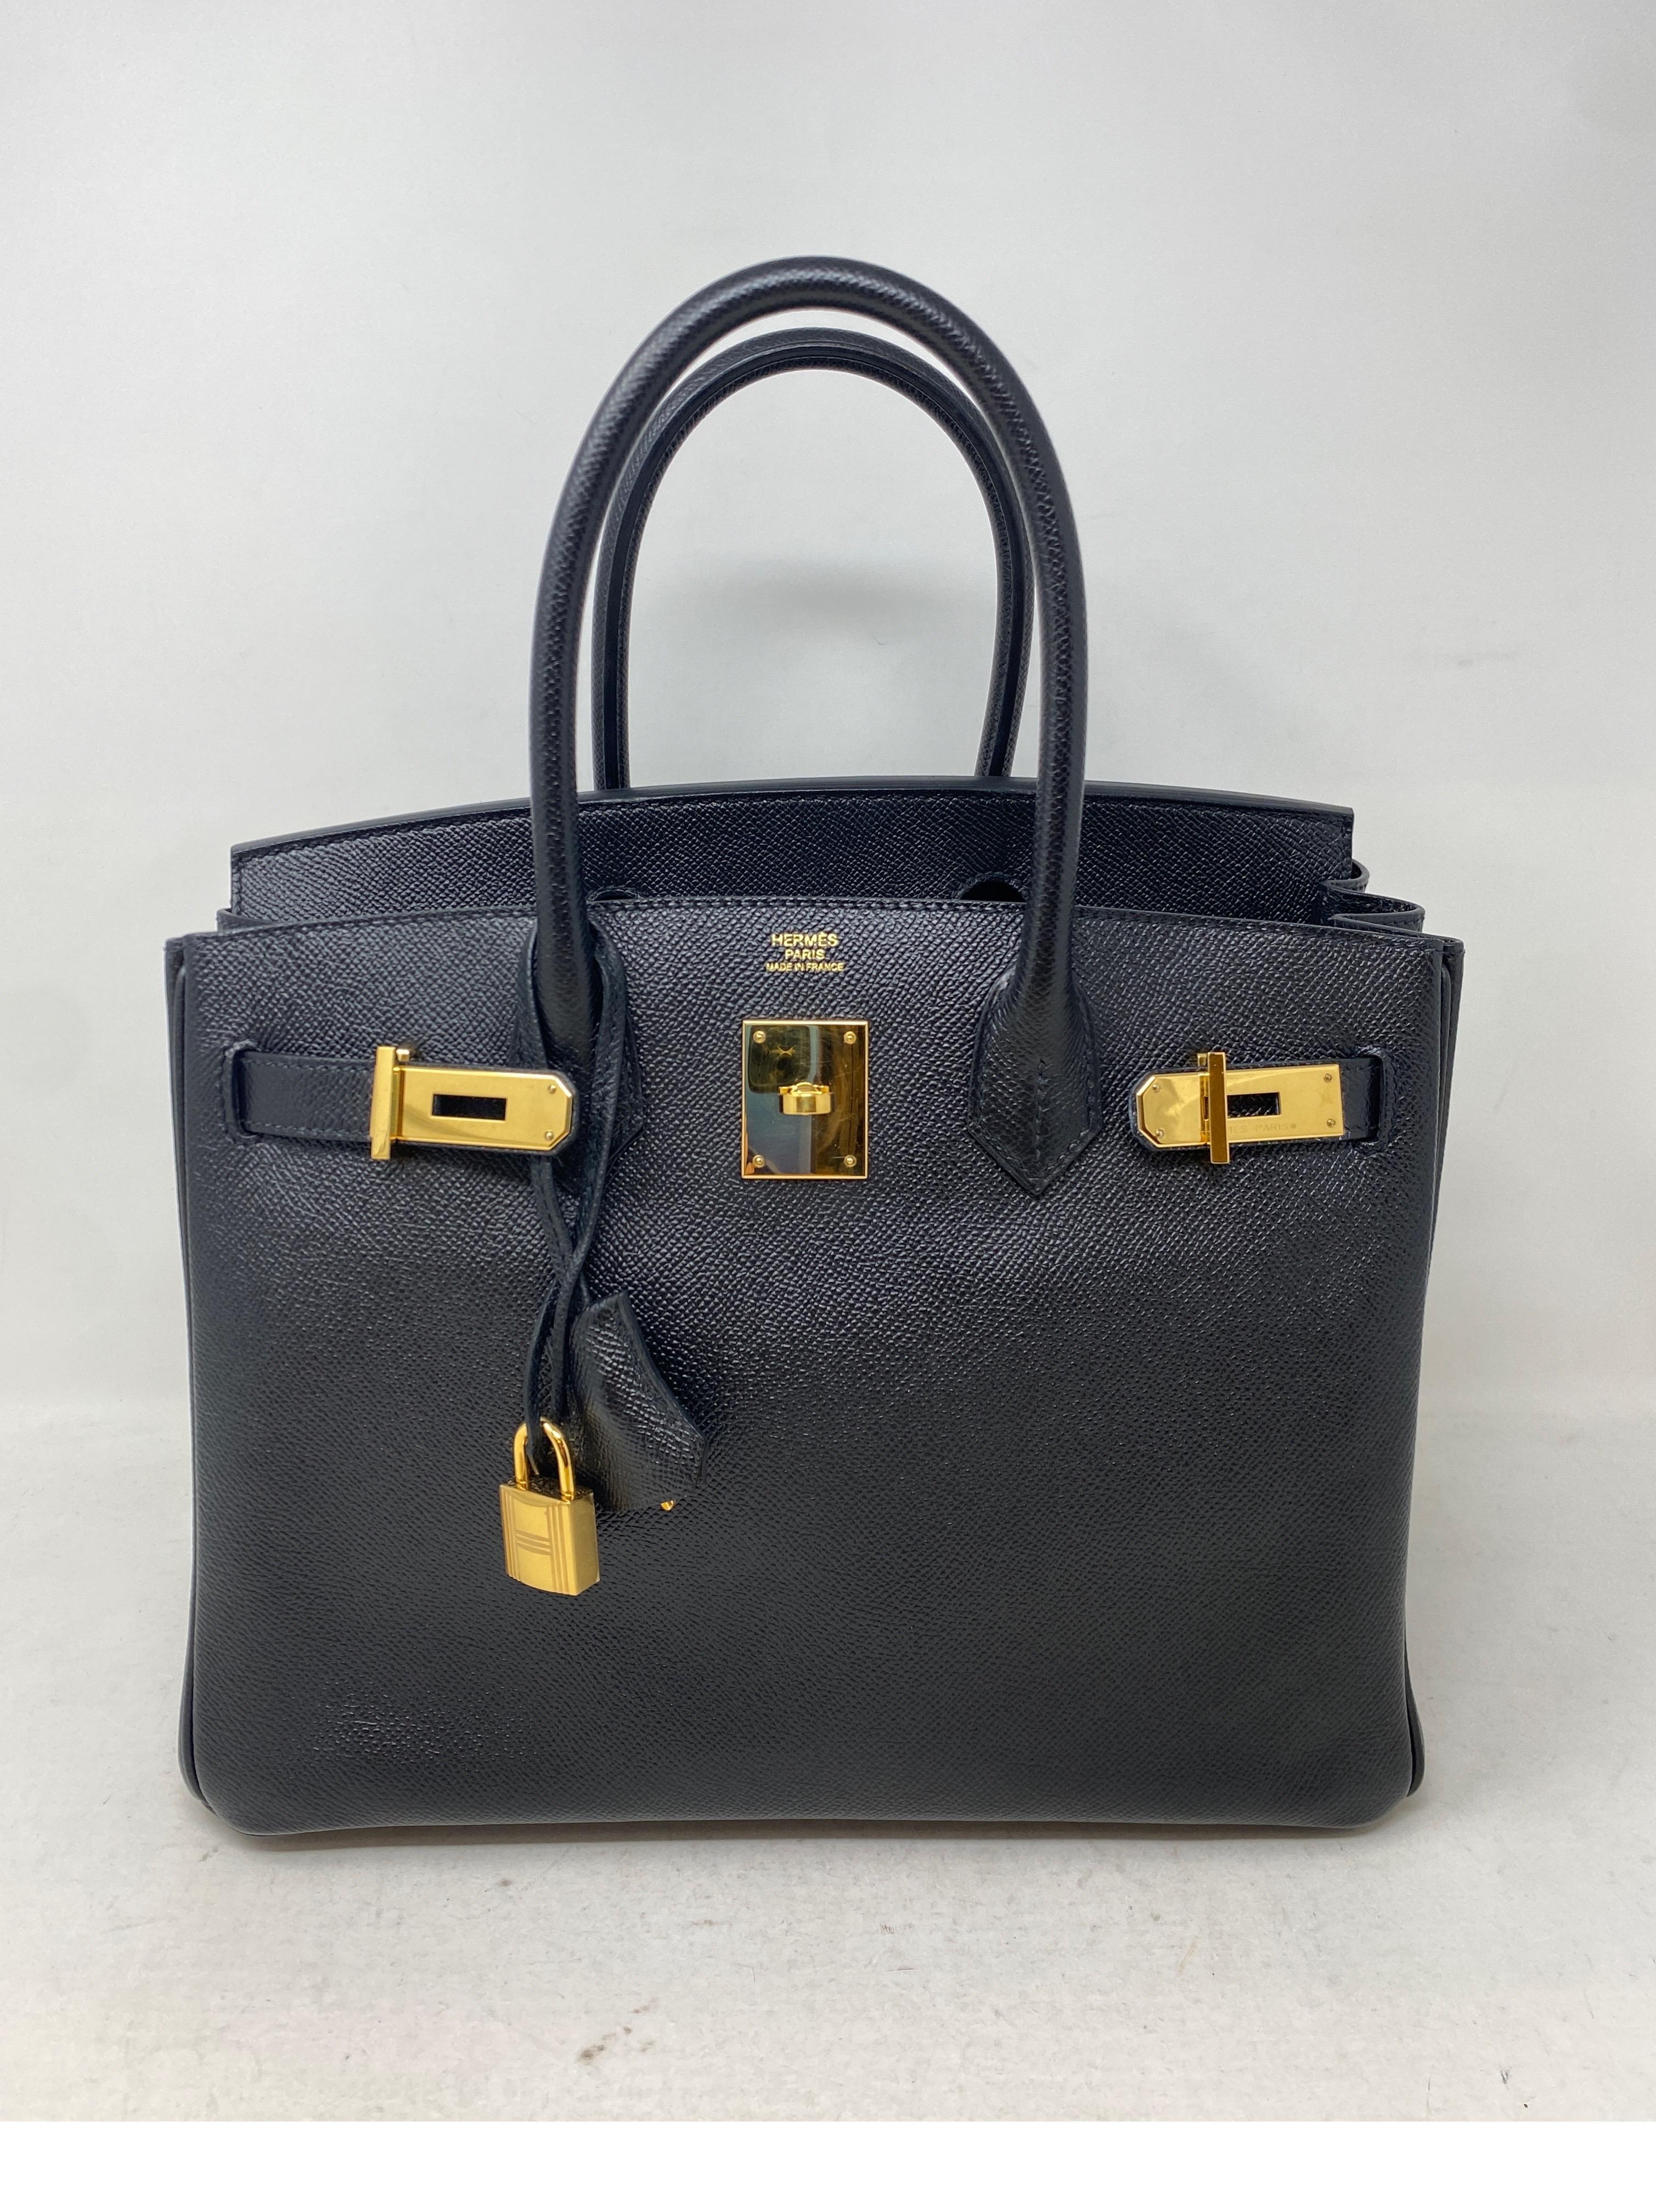 Hermes Black 30 Birkin Bag. Epsom leather. Gold hardware. Classic black Birkin in excellent condition. Most wanted and classic combination. Includes clochette, lock, keys, and dust bag. Guaranteed authnetic. 